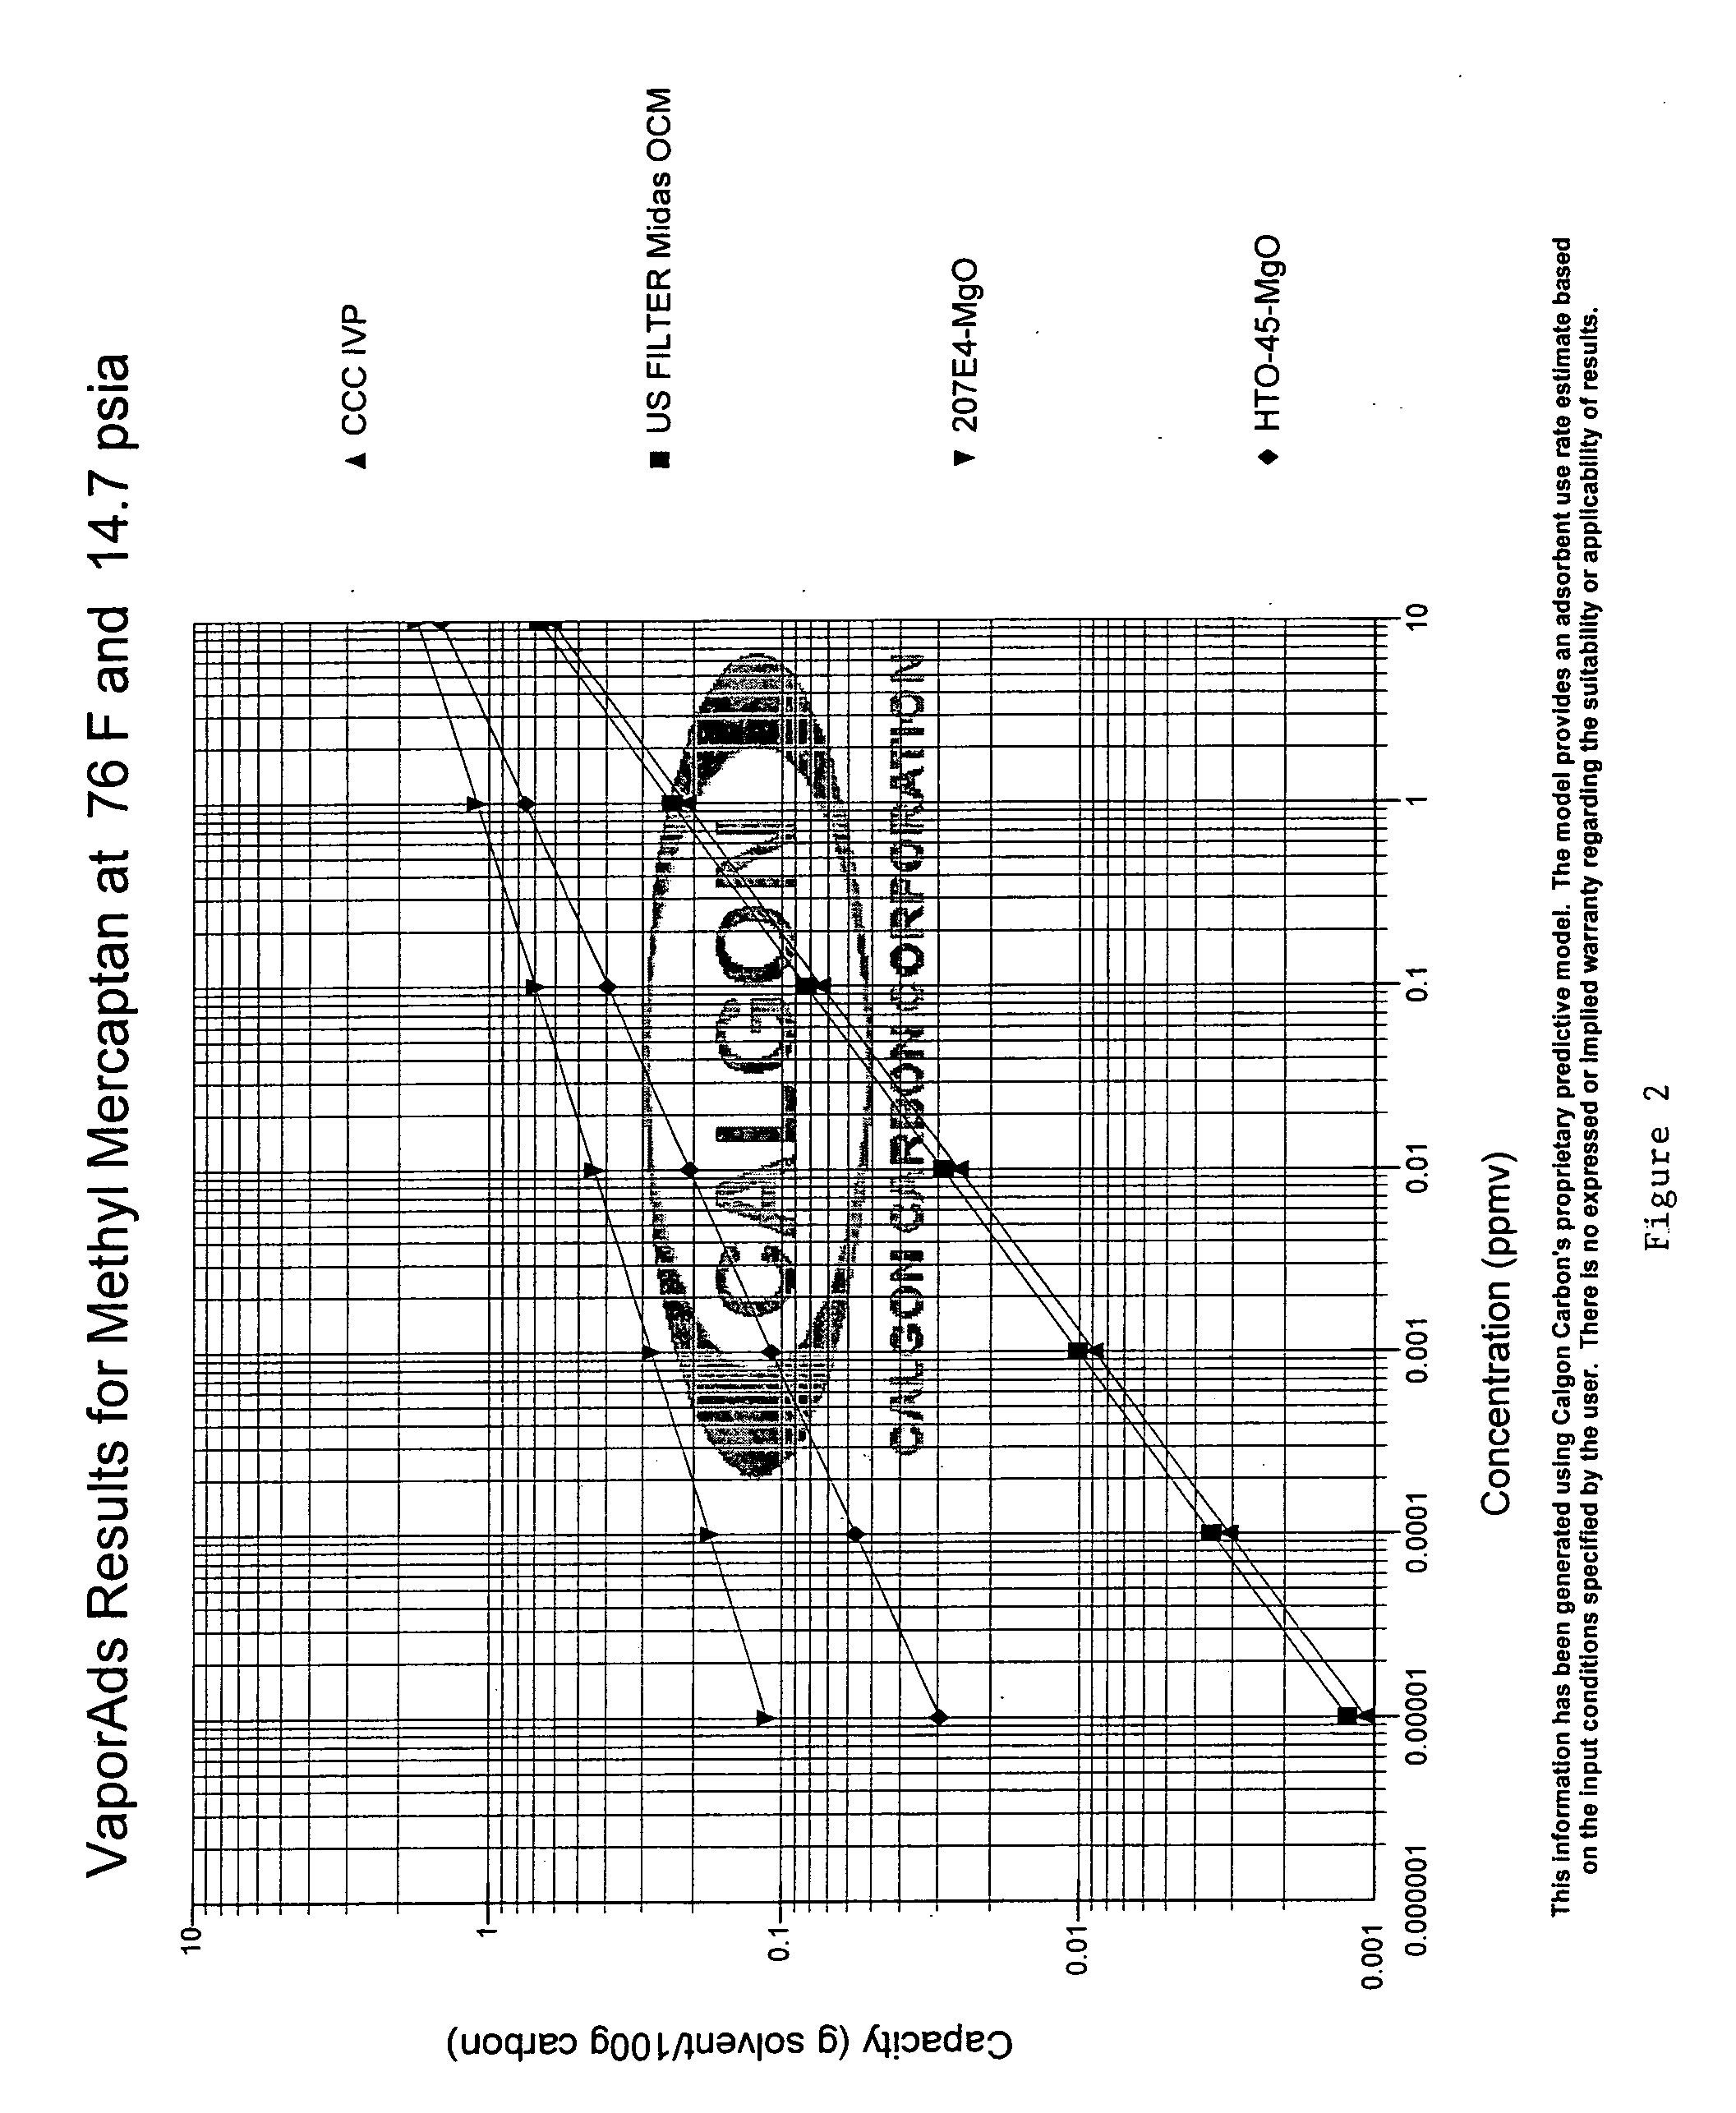 Adsorbents for removing H2S, other odor causing compounds, and acid gases from gas streams and methods for producing and using these adsorbents